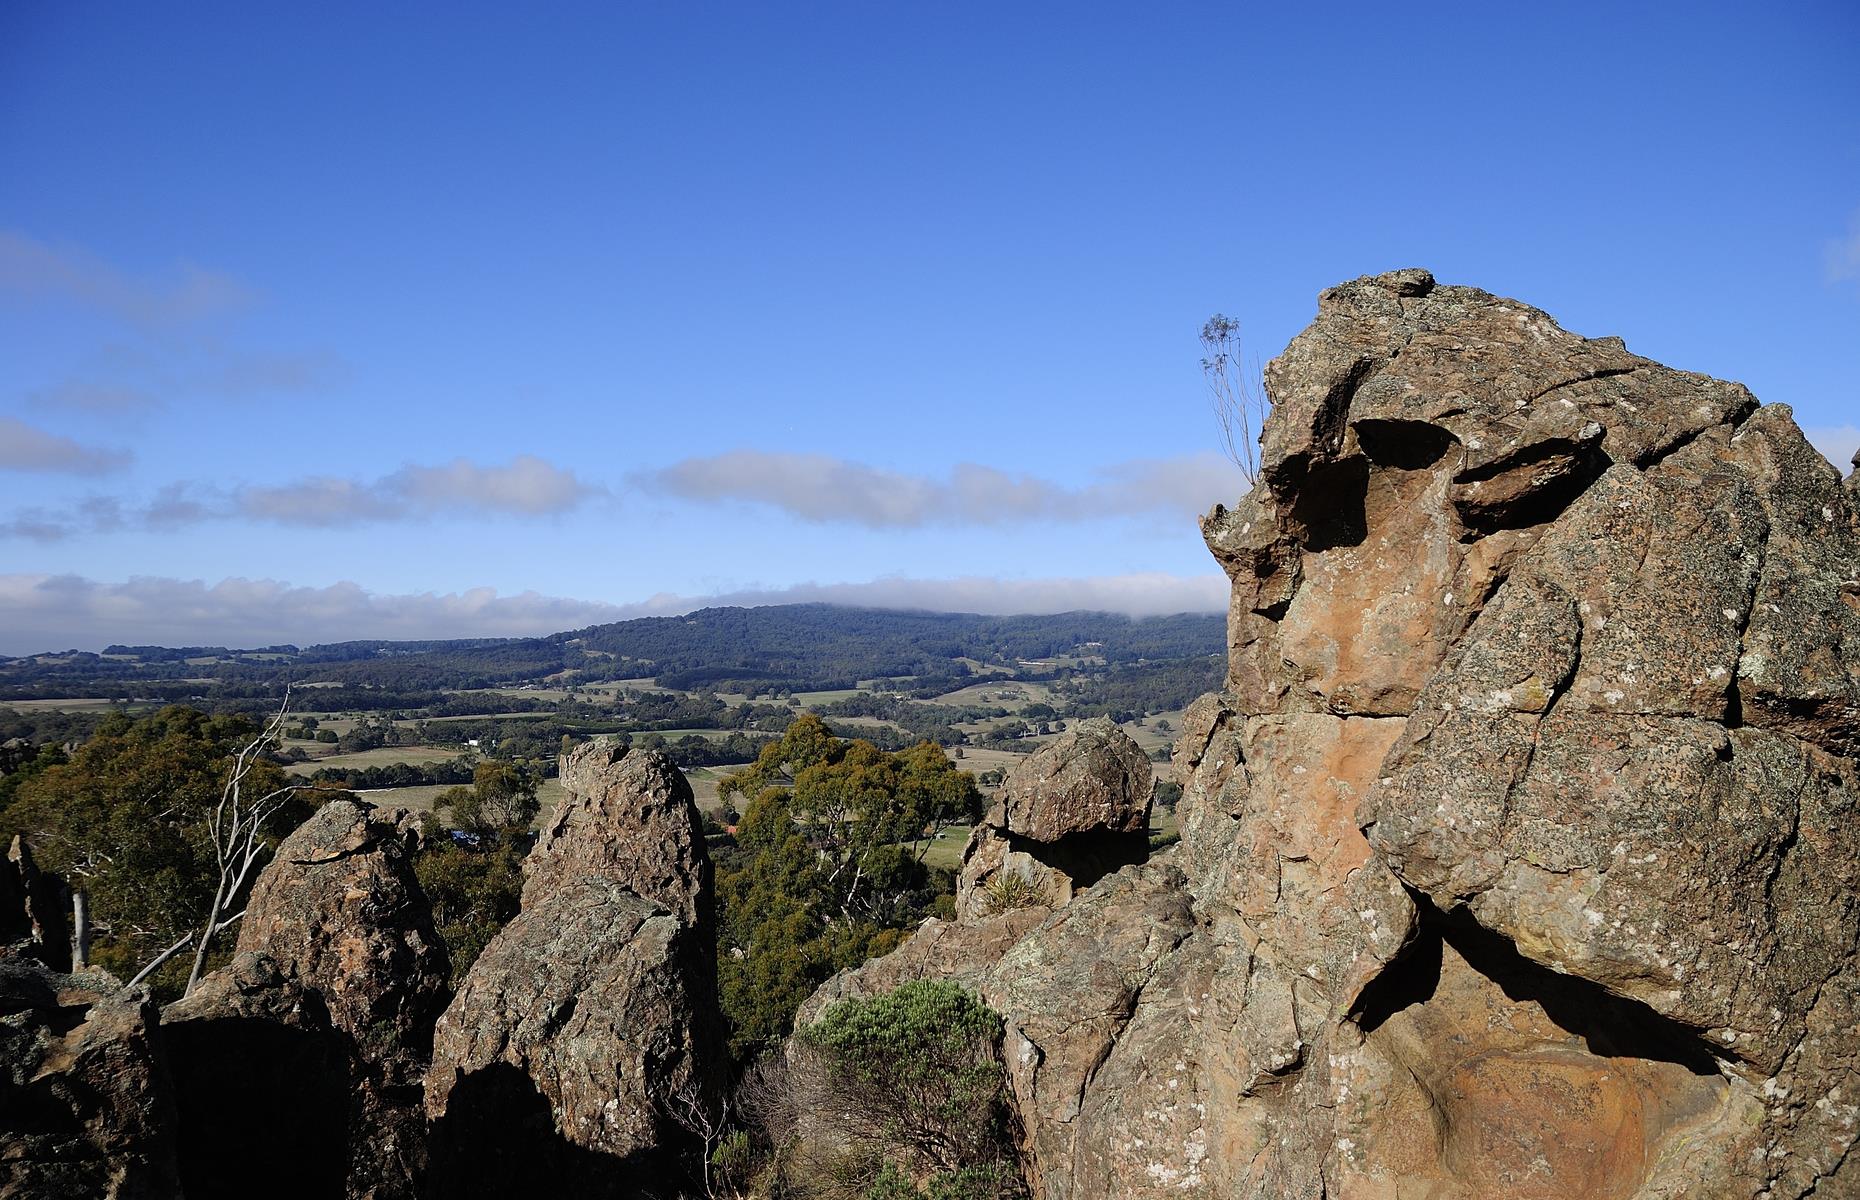 <p>Shrouded in mystery, thanks to Joan Lindsay’s novel <em>Picnic at Hanging Rock</em>, this jagged outcrop in the Macedon Ranges is another of Australia’s intriguing geographical formations. Peppered with caves, tunnels and overhanging boulders, the distinctive rock formation was used for sacred ceremonies and initiations by the Dja Dja Wurrung, Woi Wurrung and Taungurung people, who are said to have avoided its summit believing it to be inhabited by evil spirits. But if you’re not easily spooked, the views from the top are spectacular.</p>